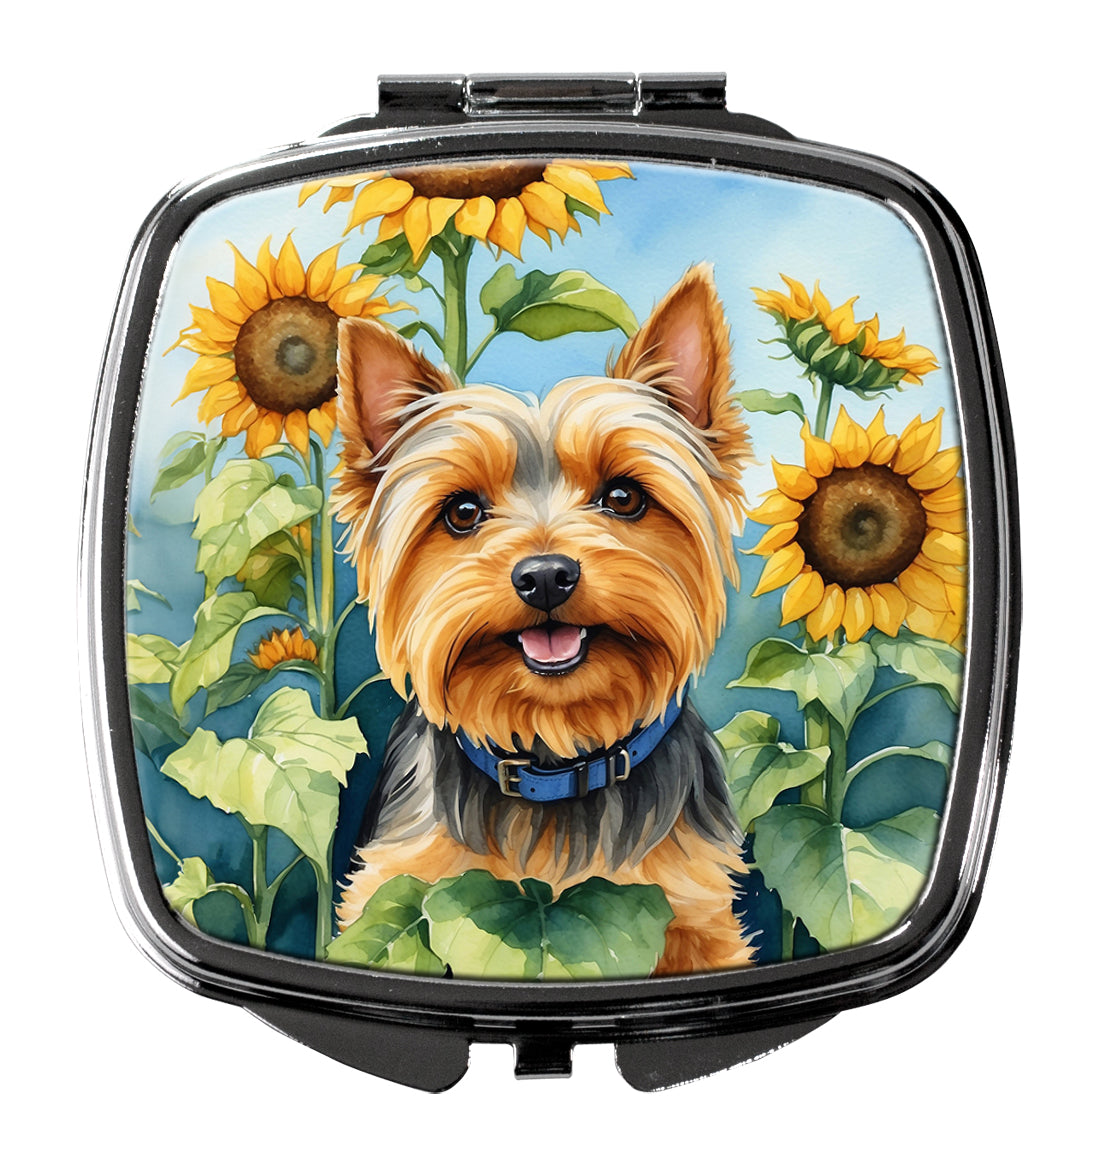 Buy this Silky Terrier in Sunflowers Compact Mirror